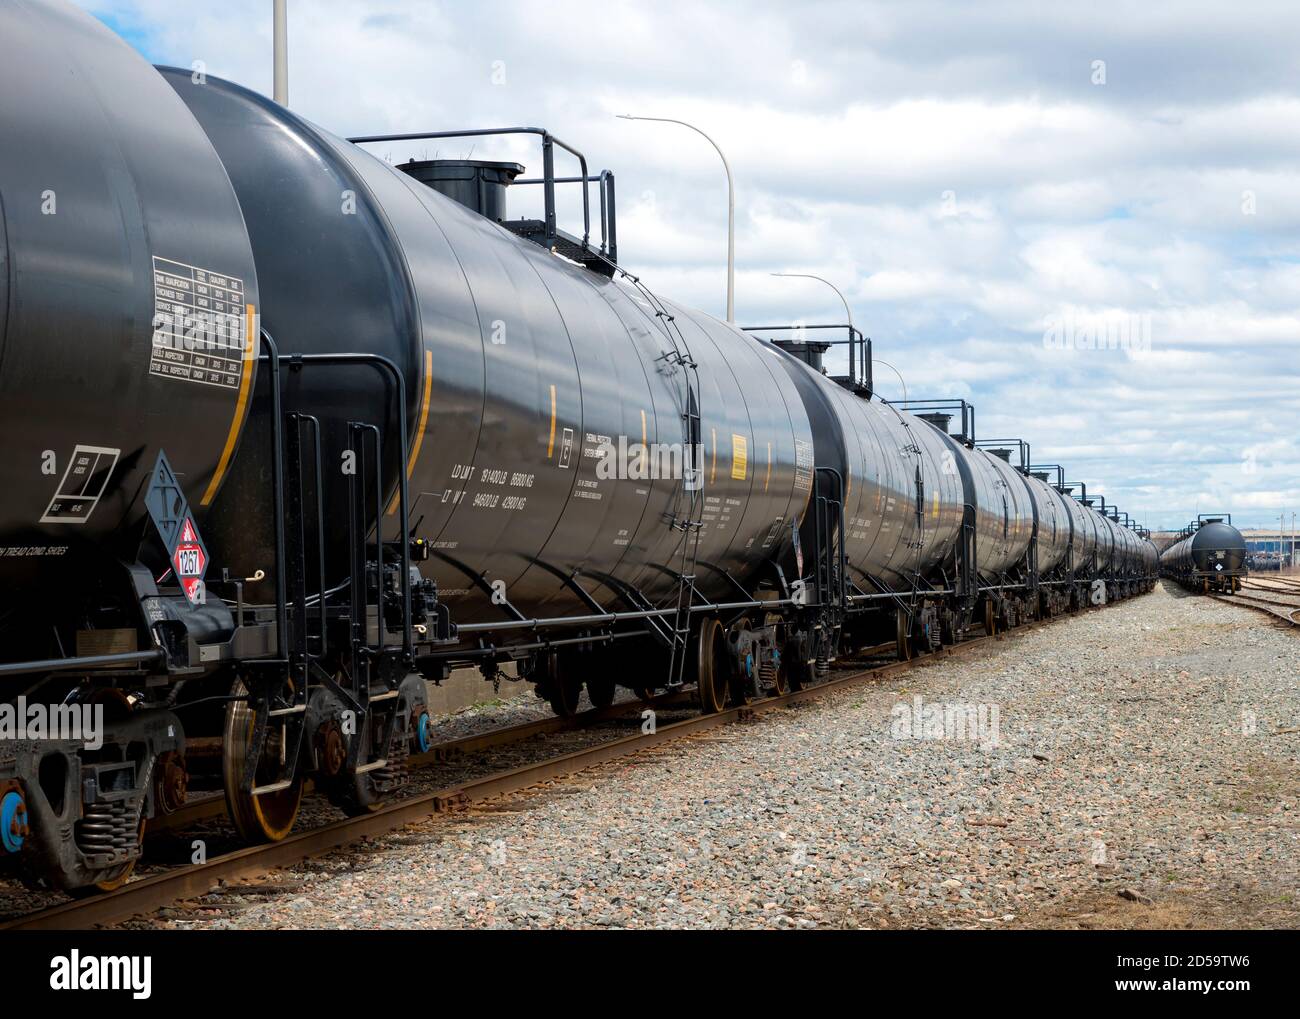 Black railway tanker cars of the type used to transport petroleum products. Several cars visible on two separate sets of tracks. Identification markin Stock Photo